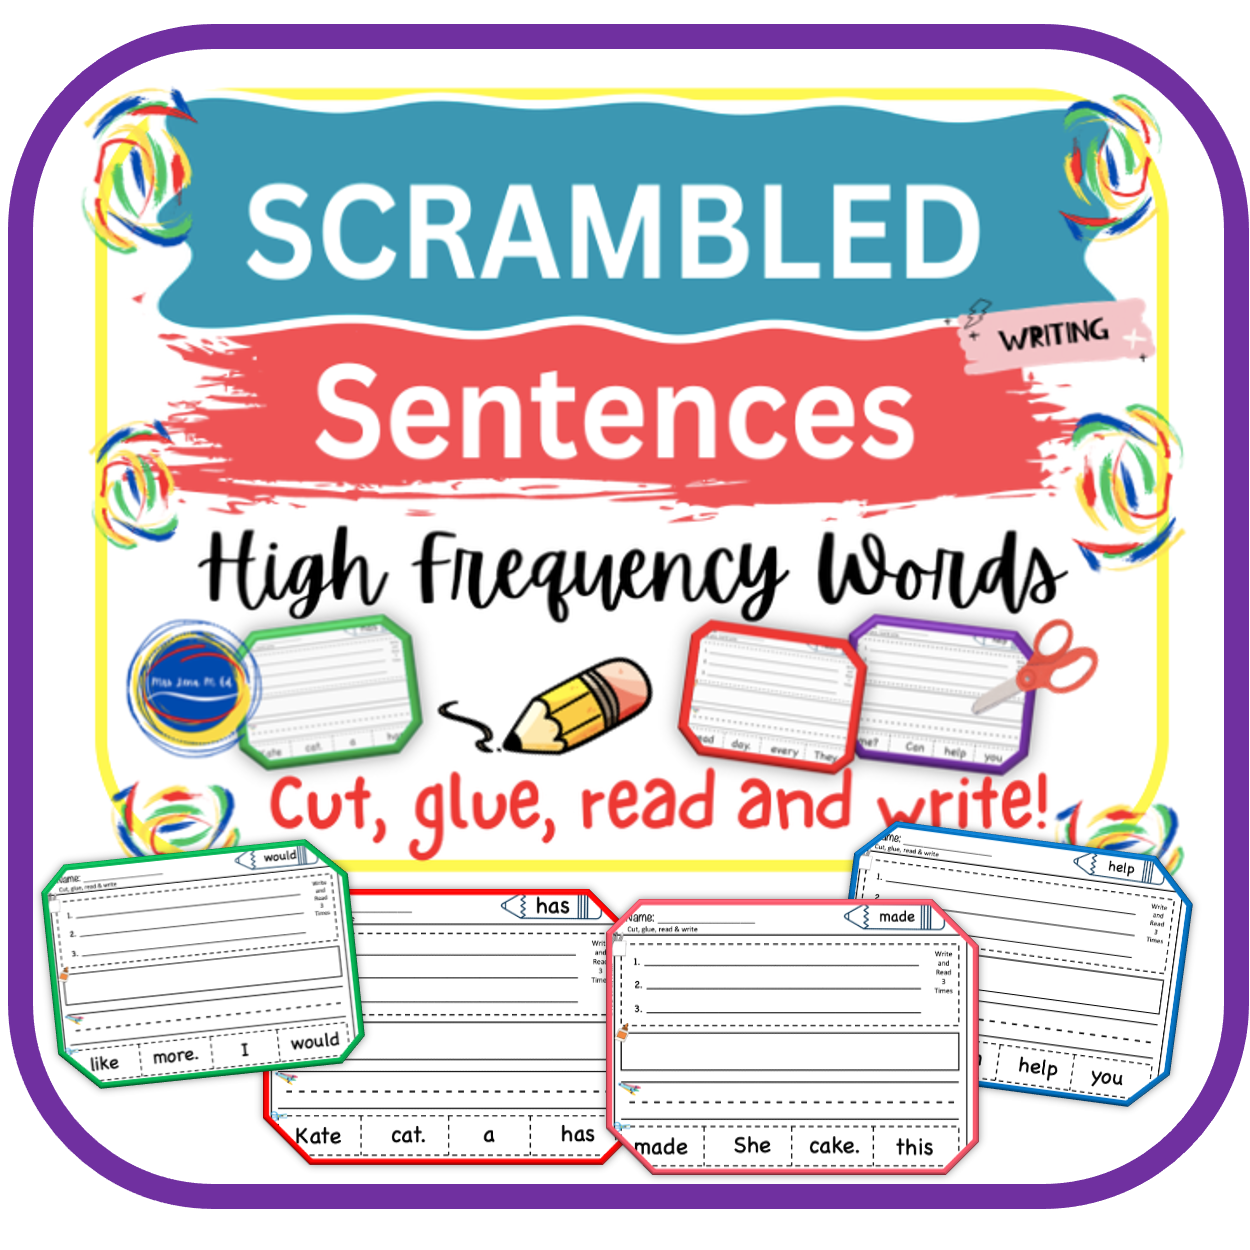 Scrambled Sentences High Frequency Sight Words RF.1.1.a Reading and Writing for Primary Grades